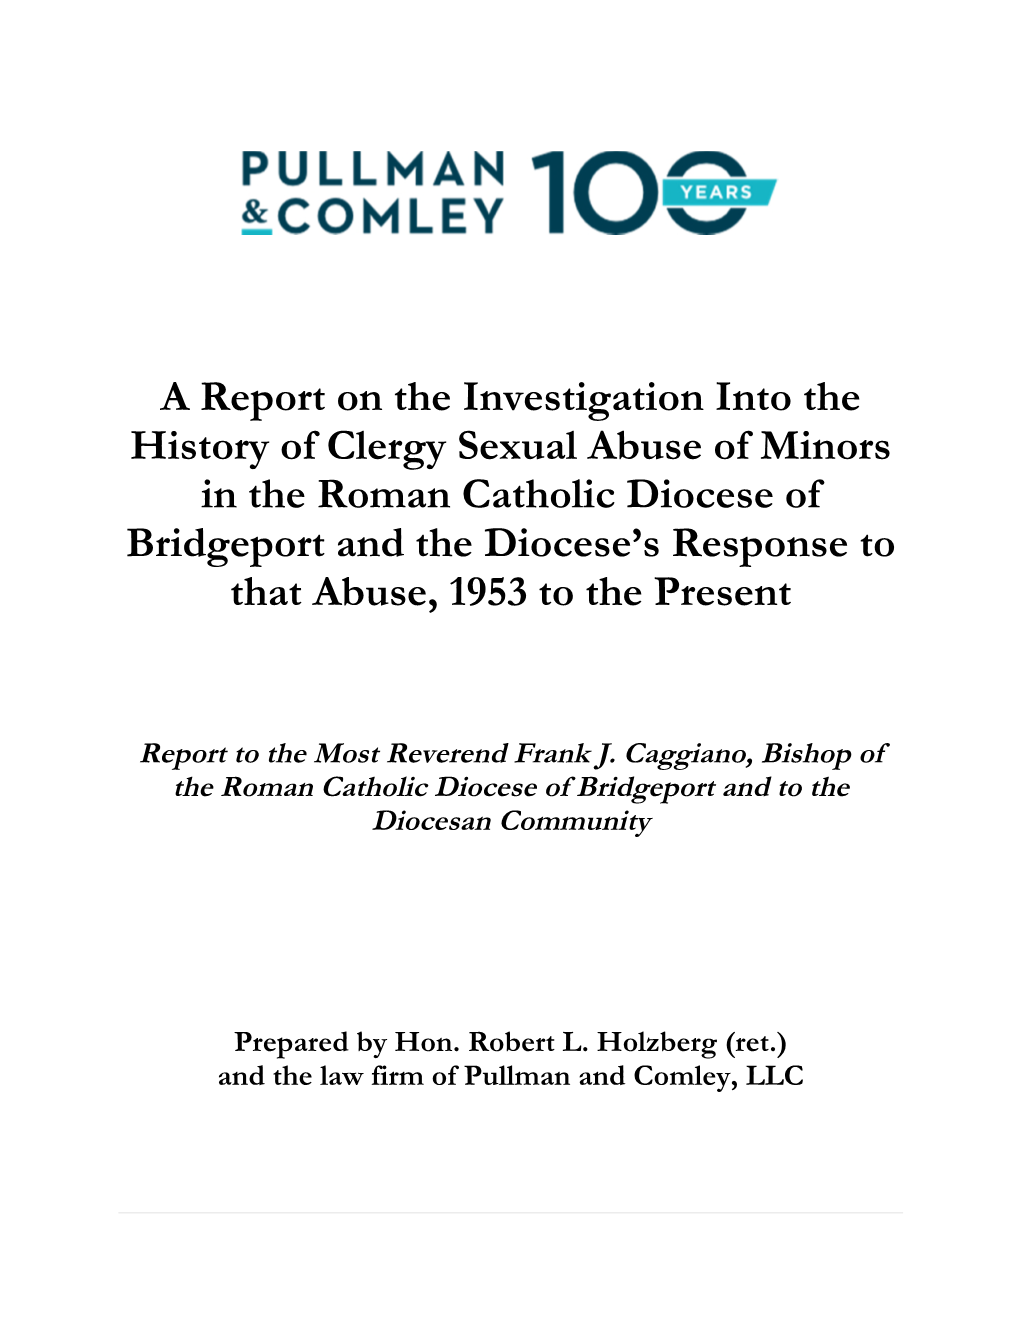 A Report on the Investigation Into the History of Clergy Sexual Abuse Of